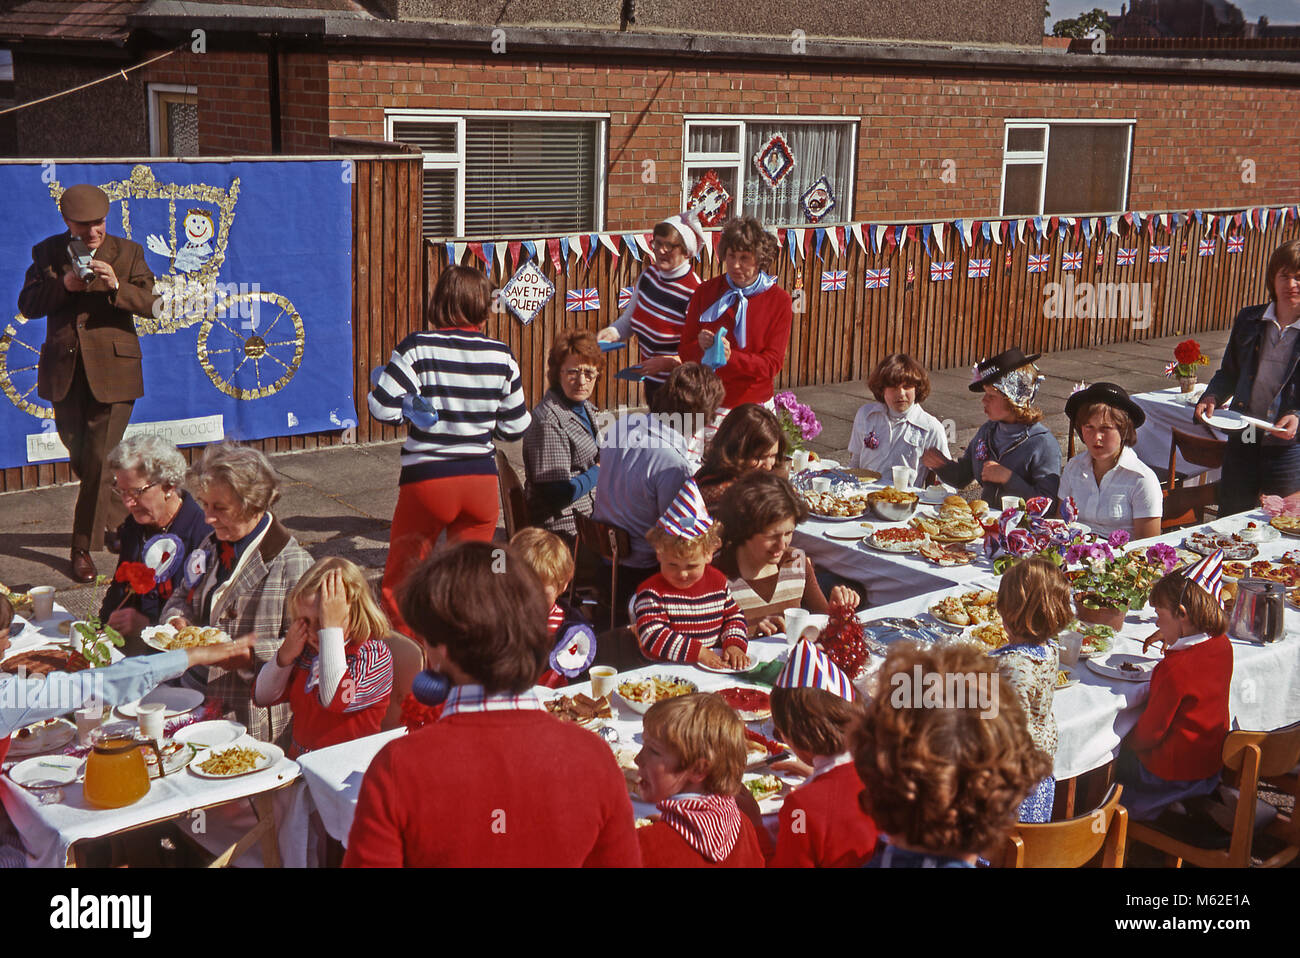 Street party, Northdene Avenue, Seaham, County Durham, England, UK, 7 June 1977 to celebrate the Silver Jubilee of Queen Elizabeth II. The twenty-fifth anniversary of her succession to the throne (not her coronation) was on 6 February 1977 but 7 June was designated for a major official and unofficial celebration day across the country. Stock Photo